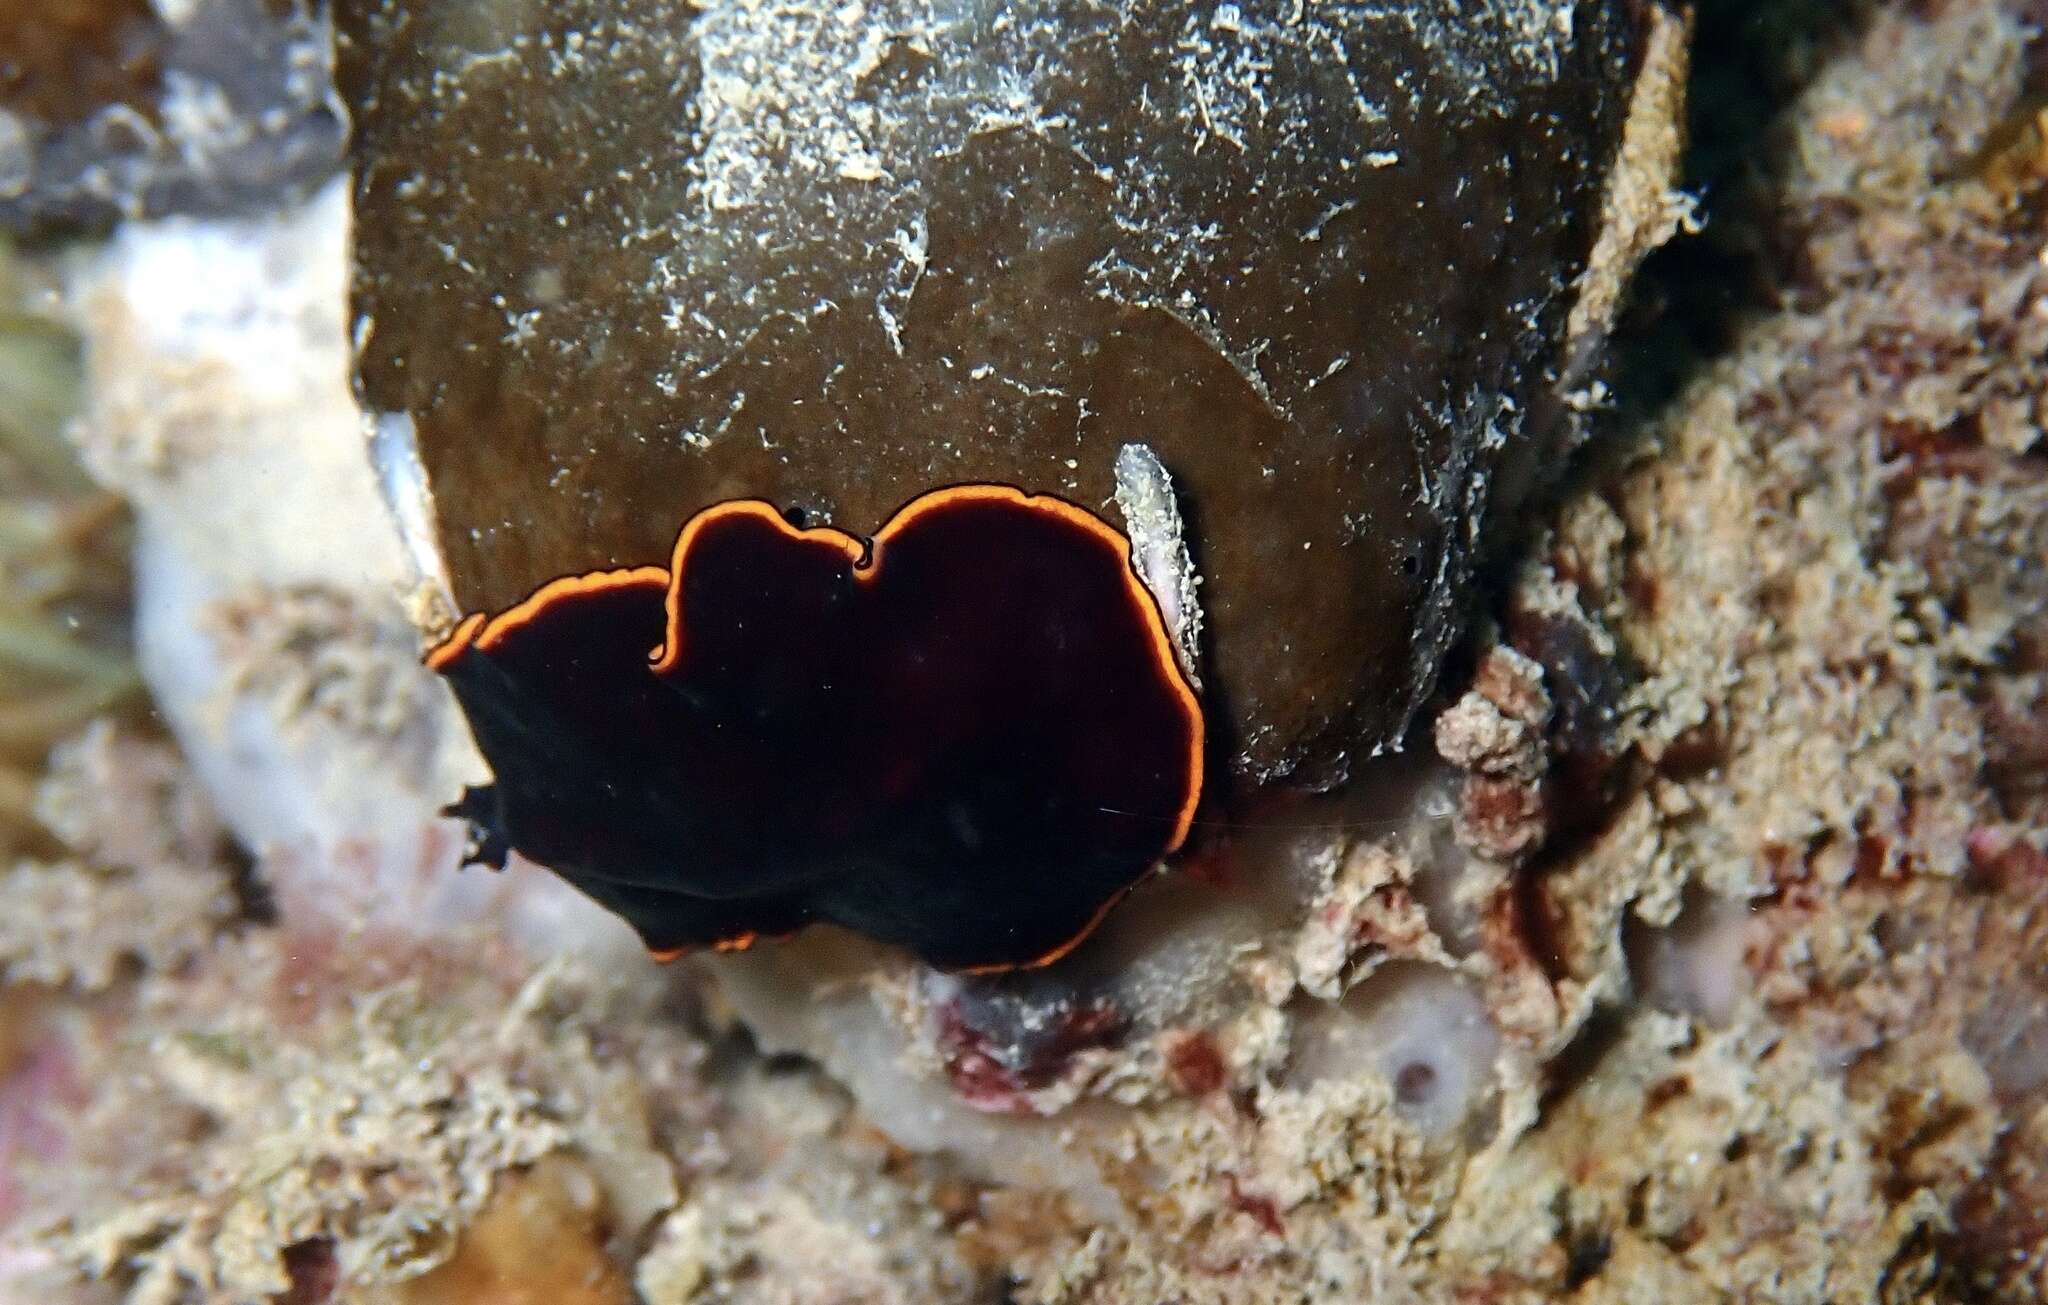 Image of red-rim flatworm